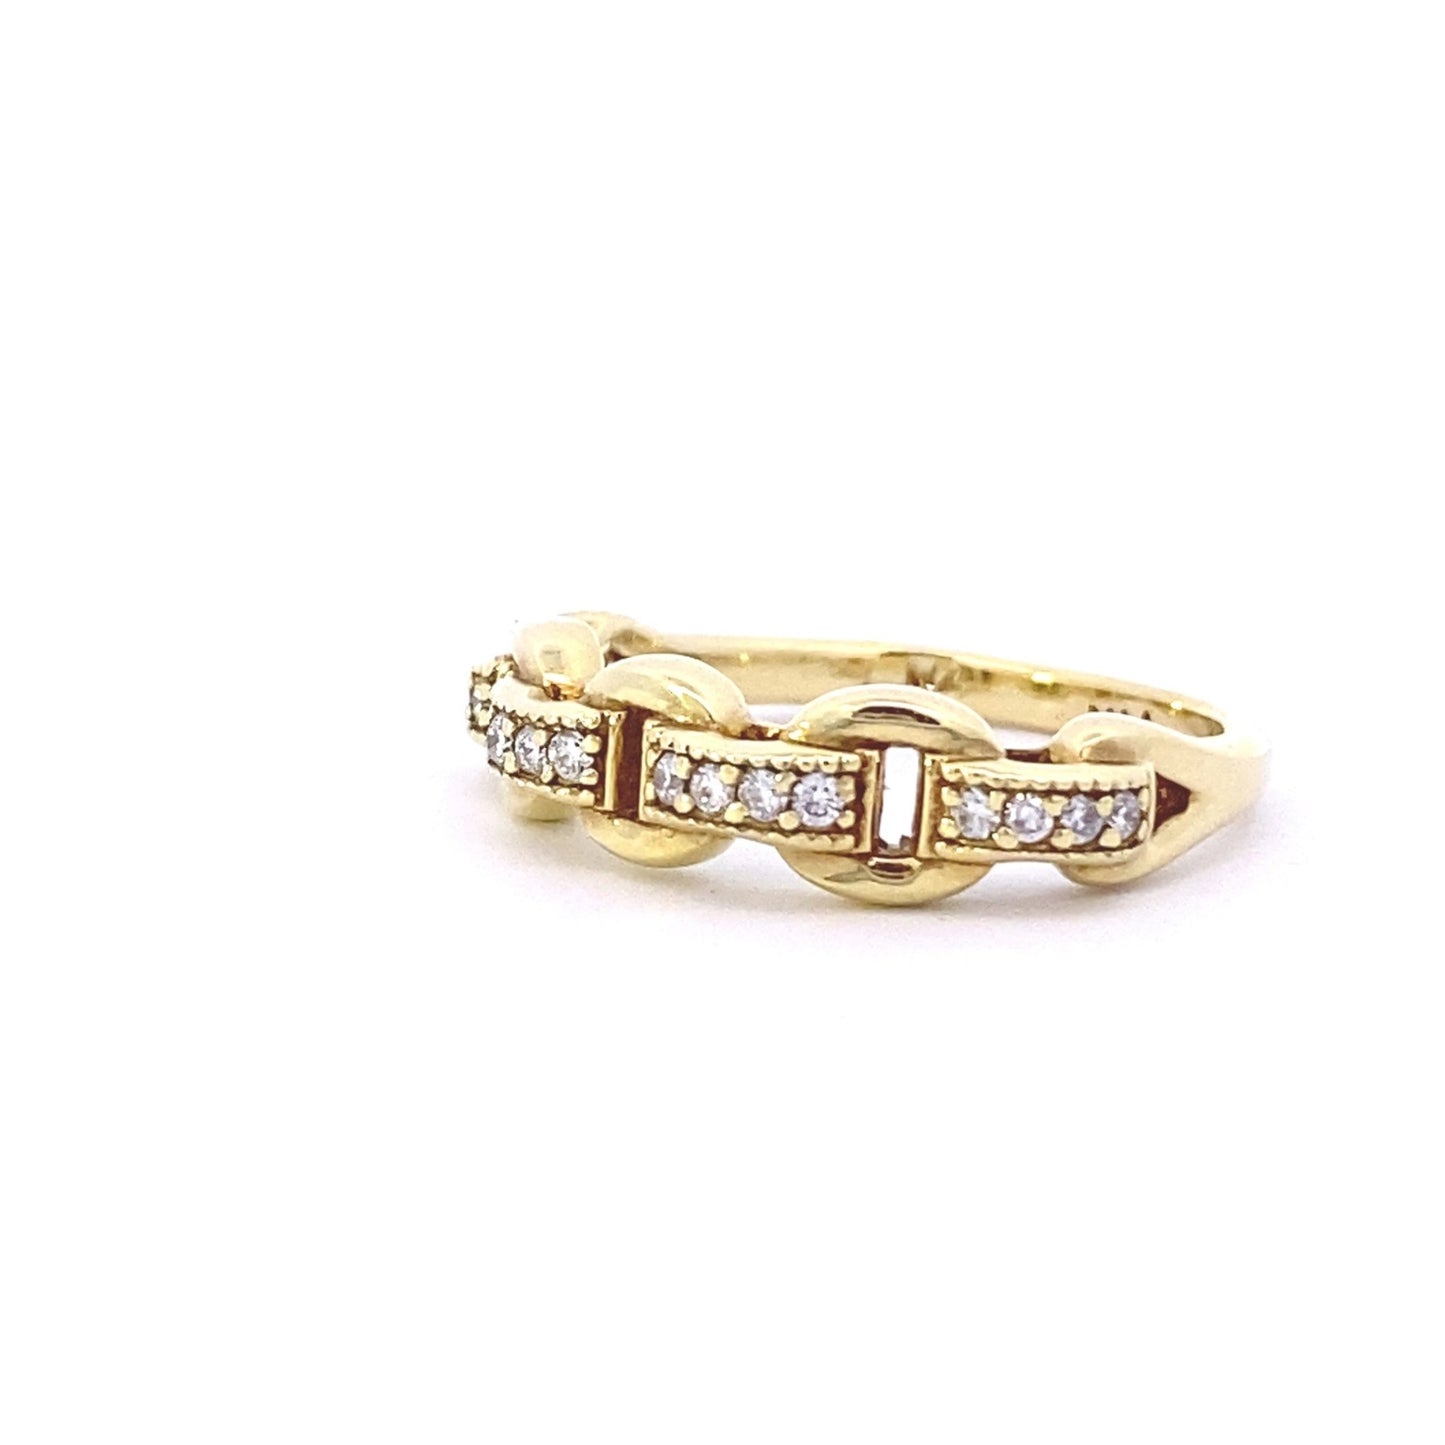 Chain-link yellow gold band with diamonds - Gaines Jewelers